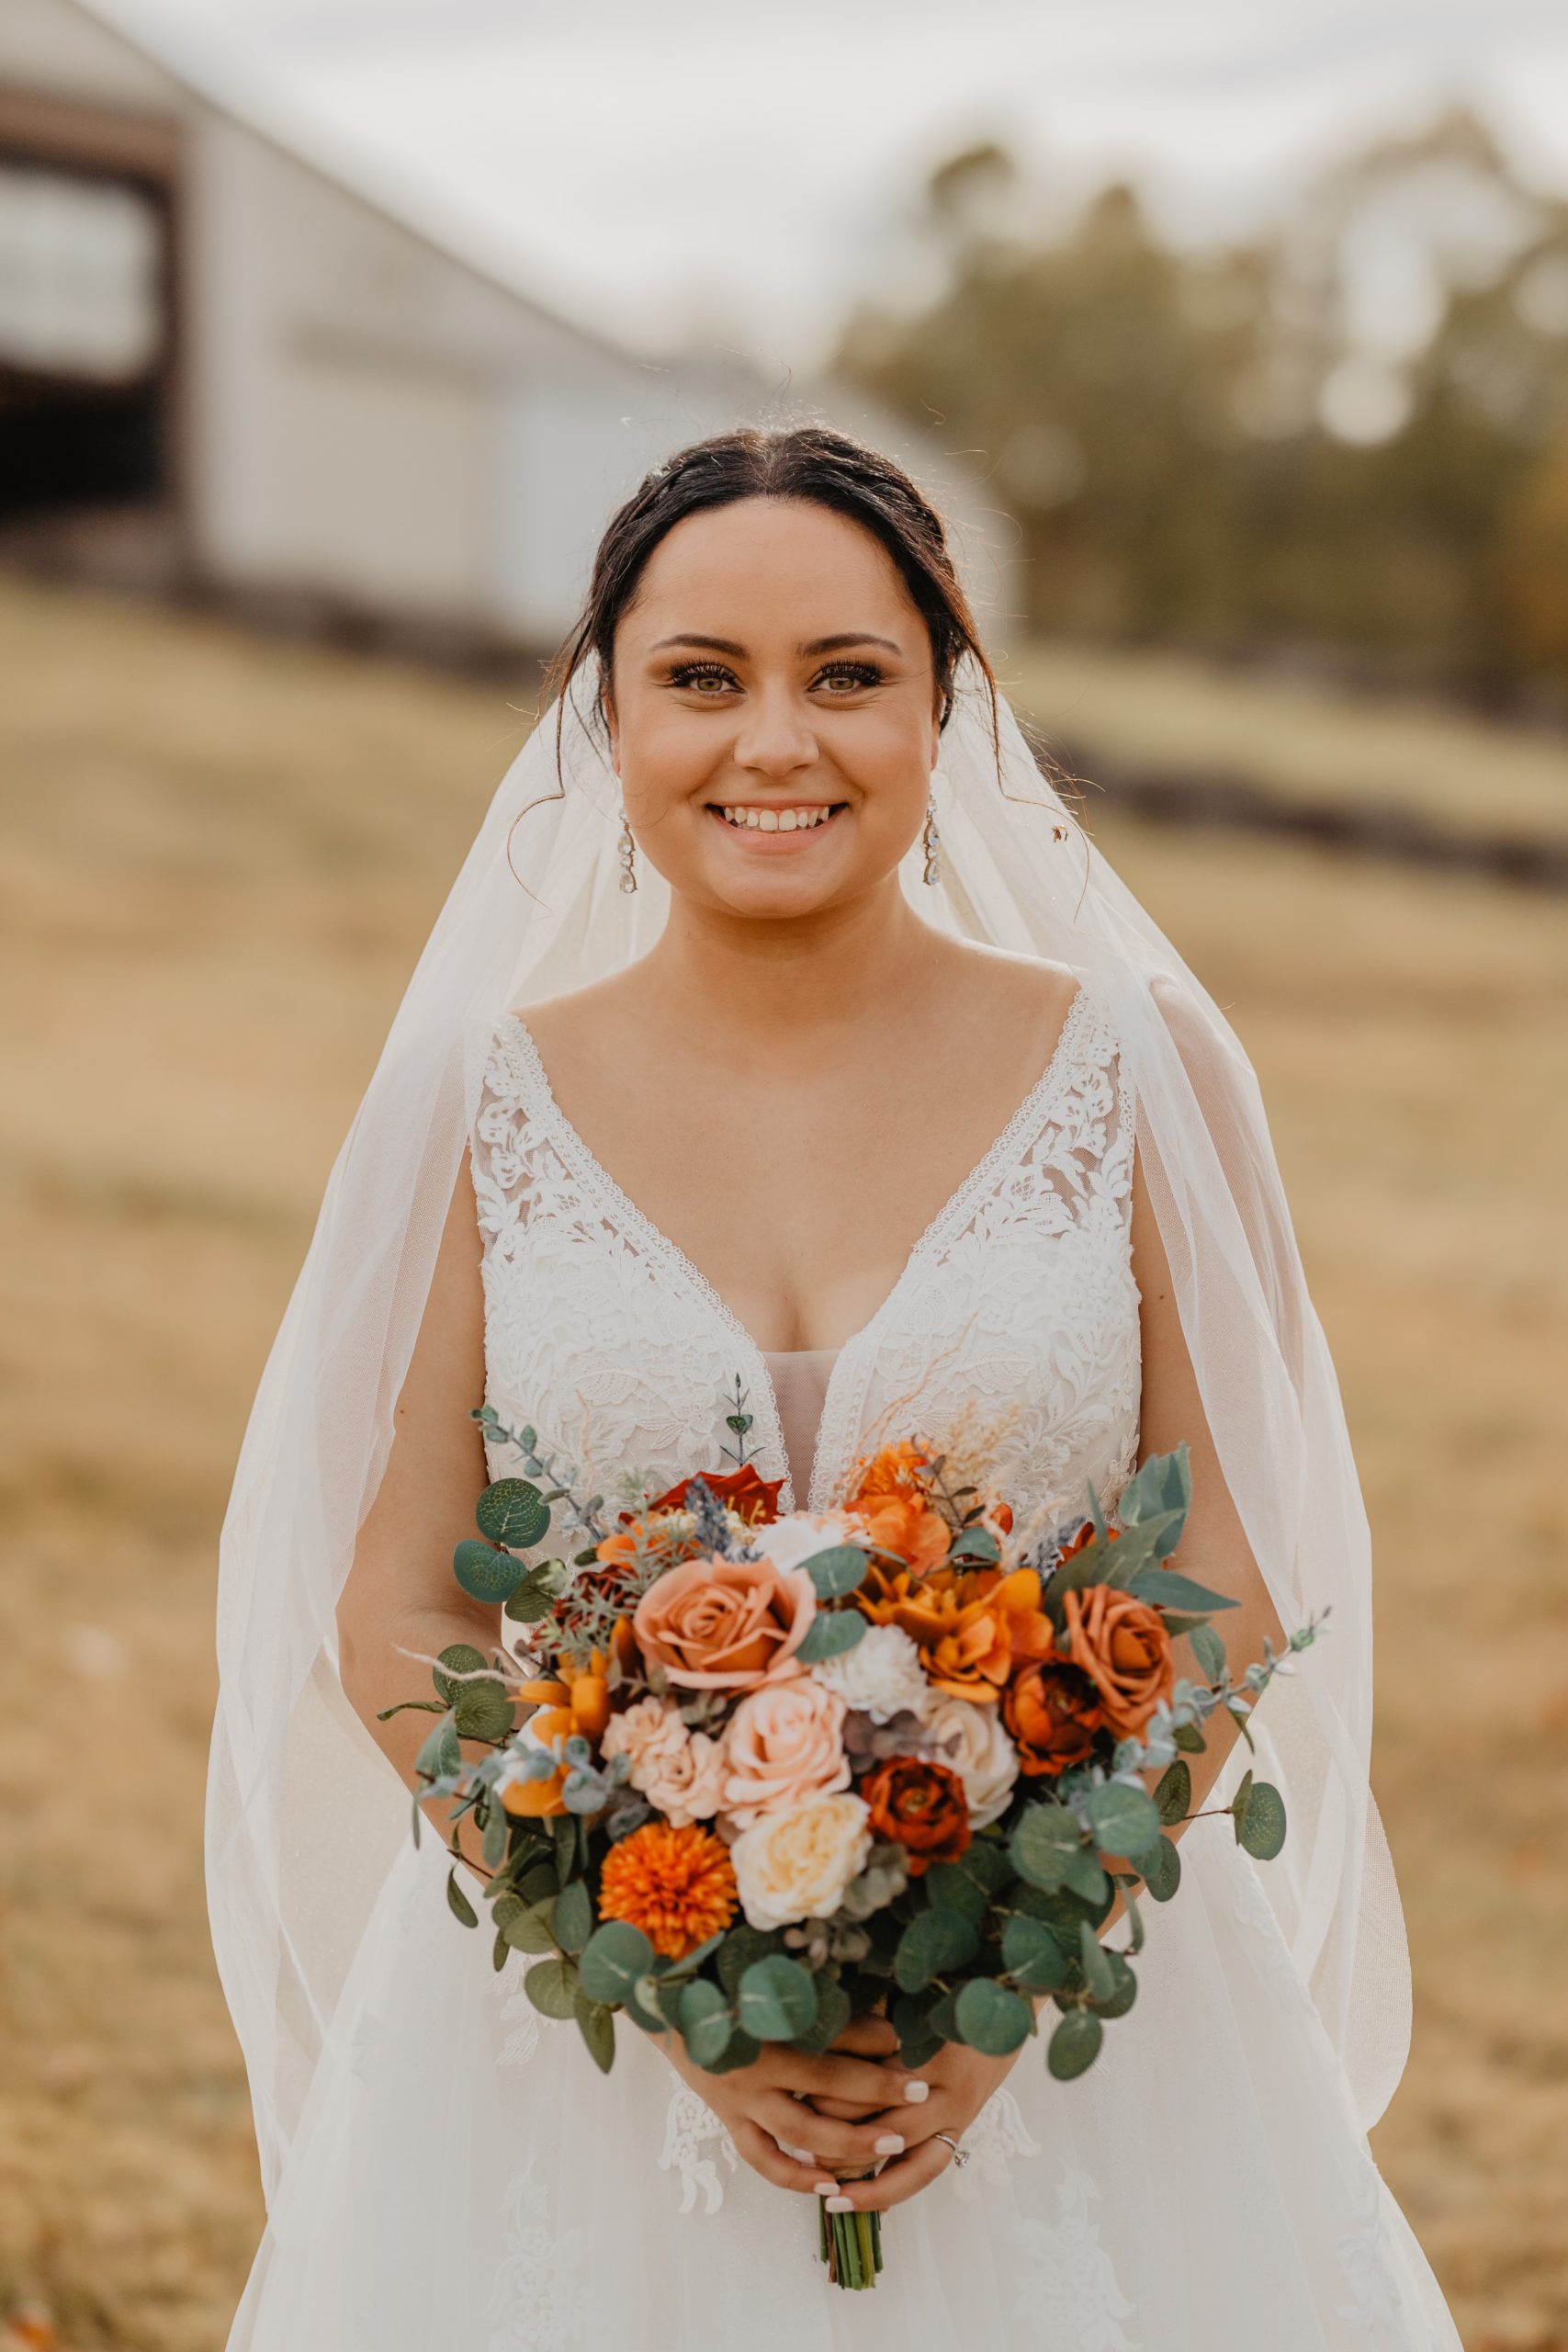 Bridal portraits | My All-time favorite photography accessories